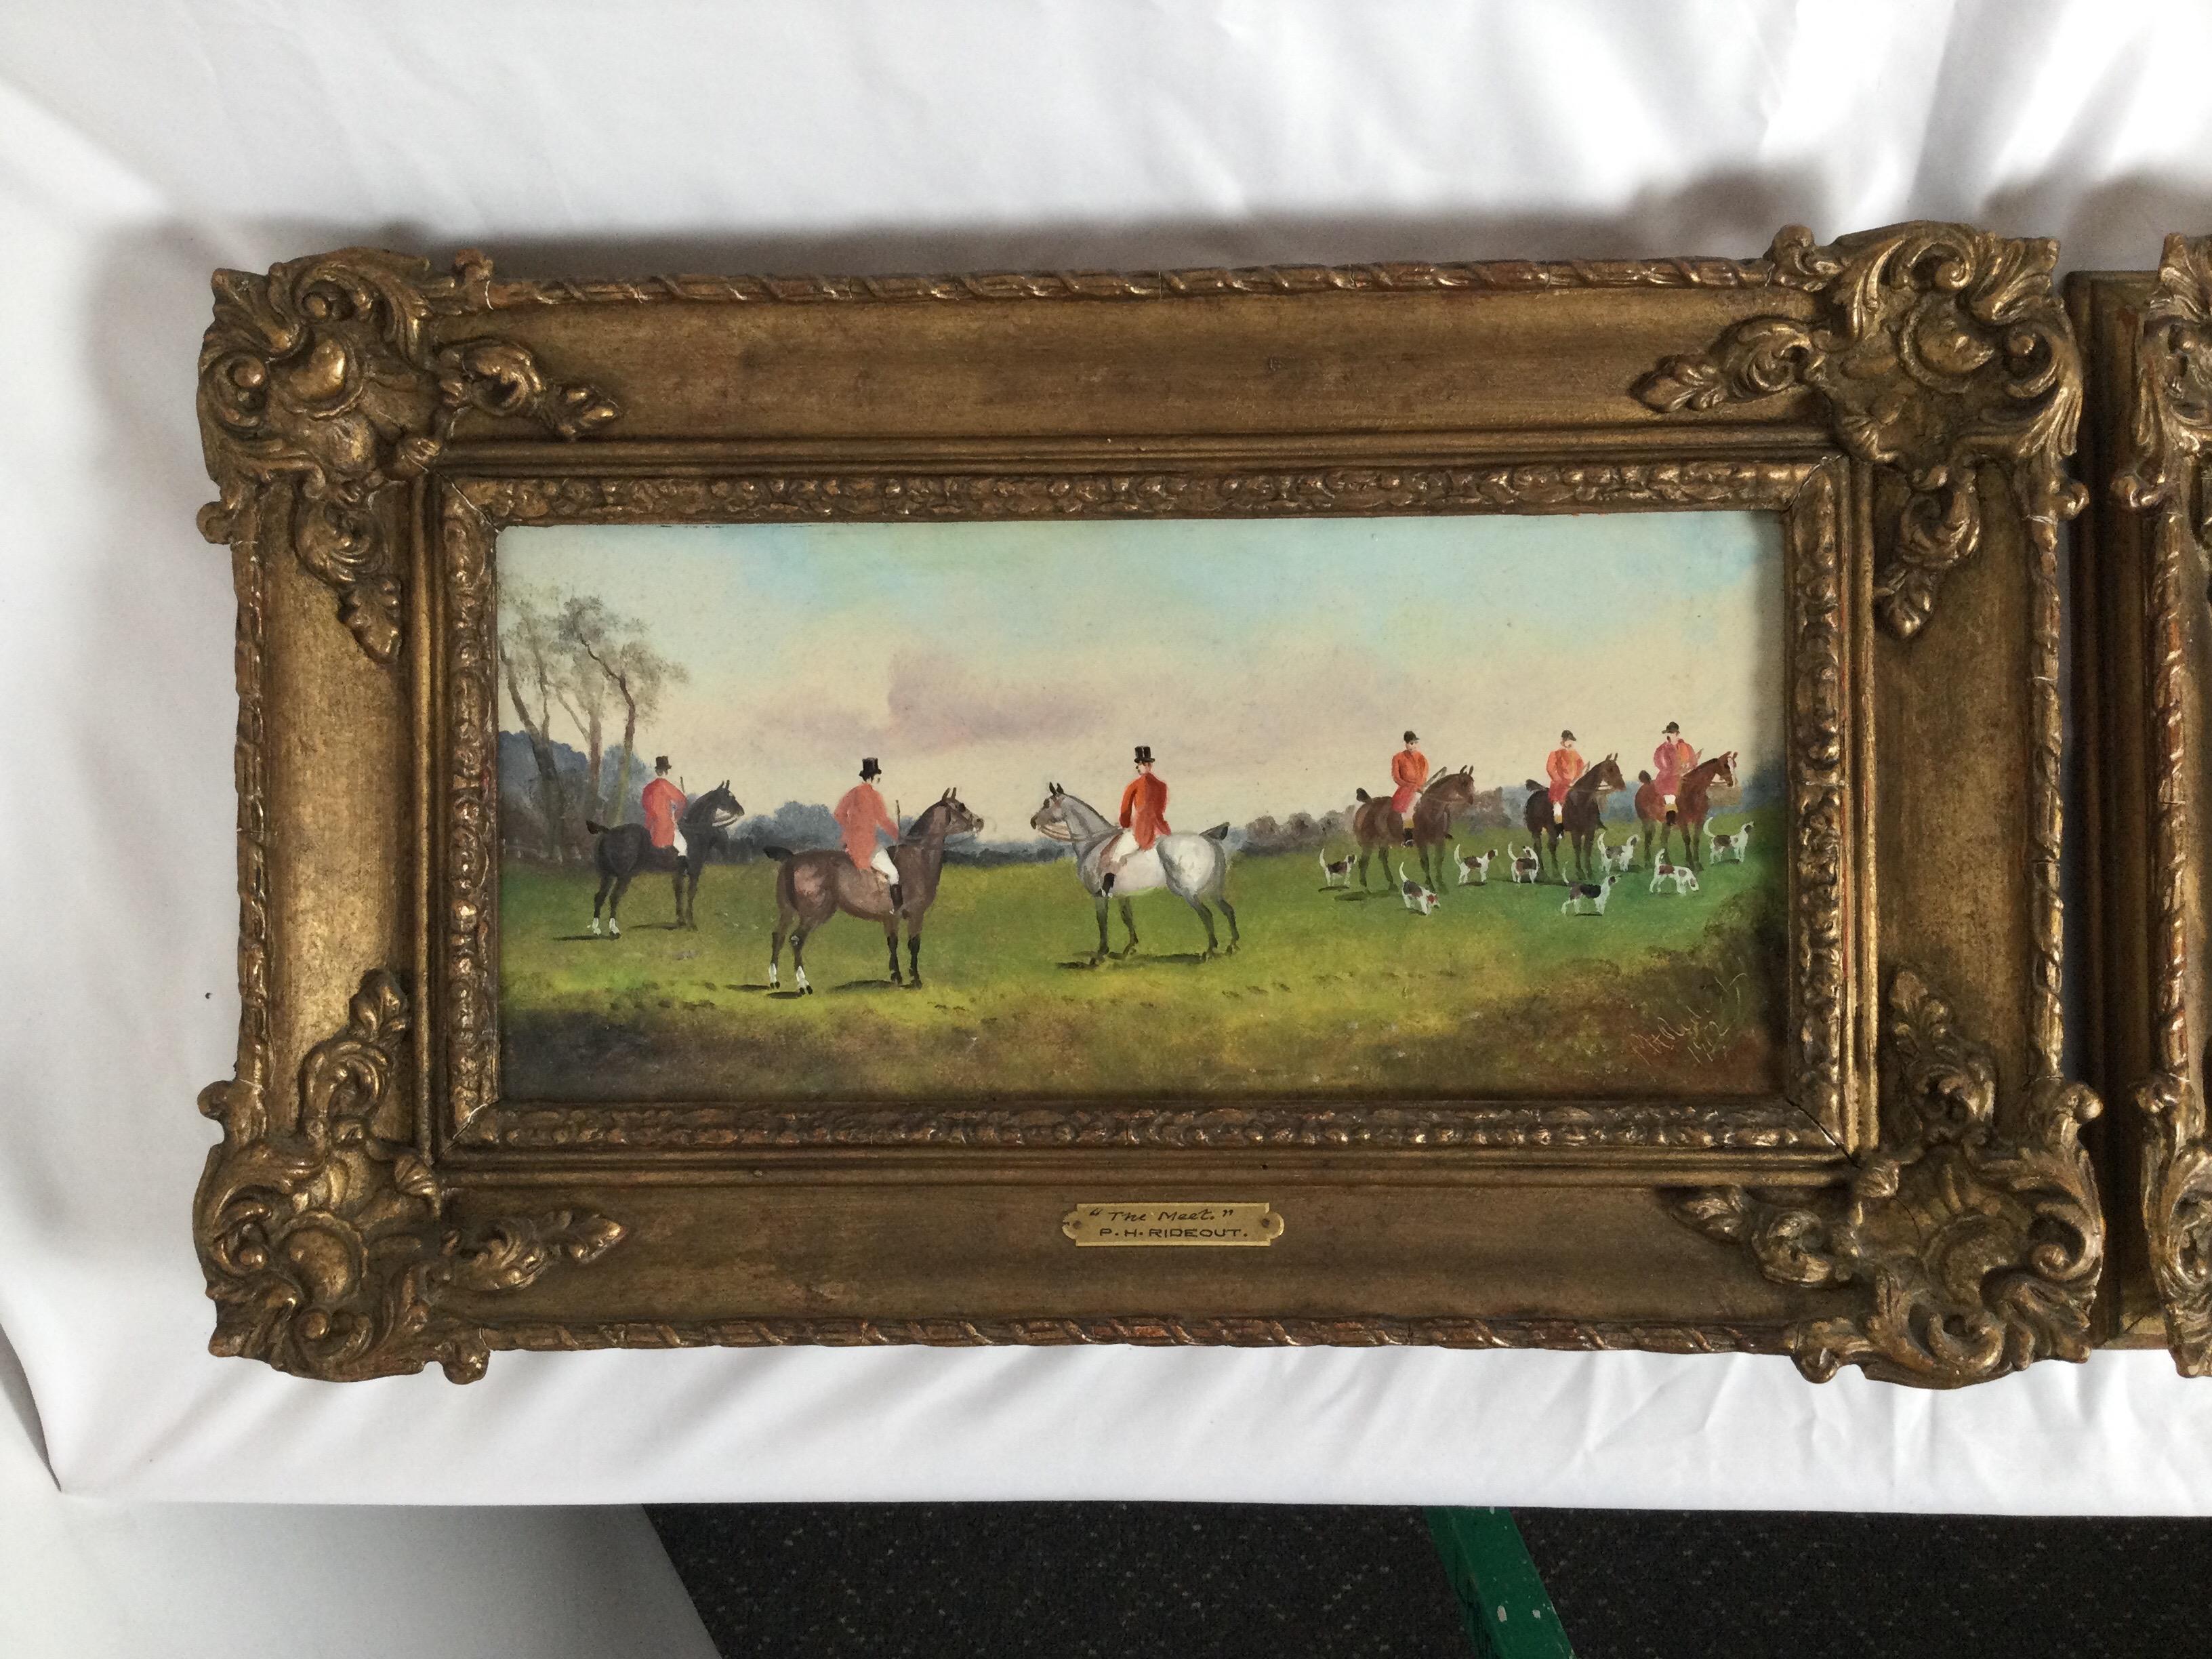 Pair P.H. Rideout fox hunt oil paintings in original frames. P.H. Rideout British 1850-1920. Signed on lower right and on brass plate. Dated 1902. Titled 